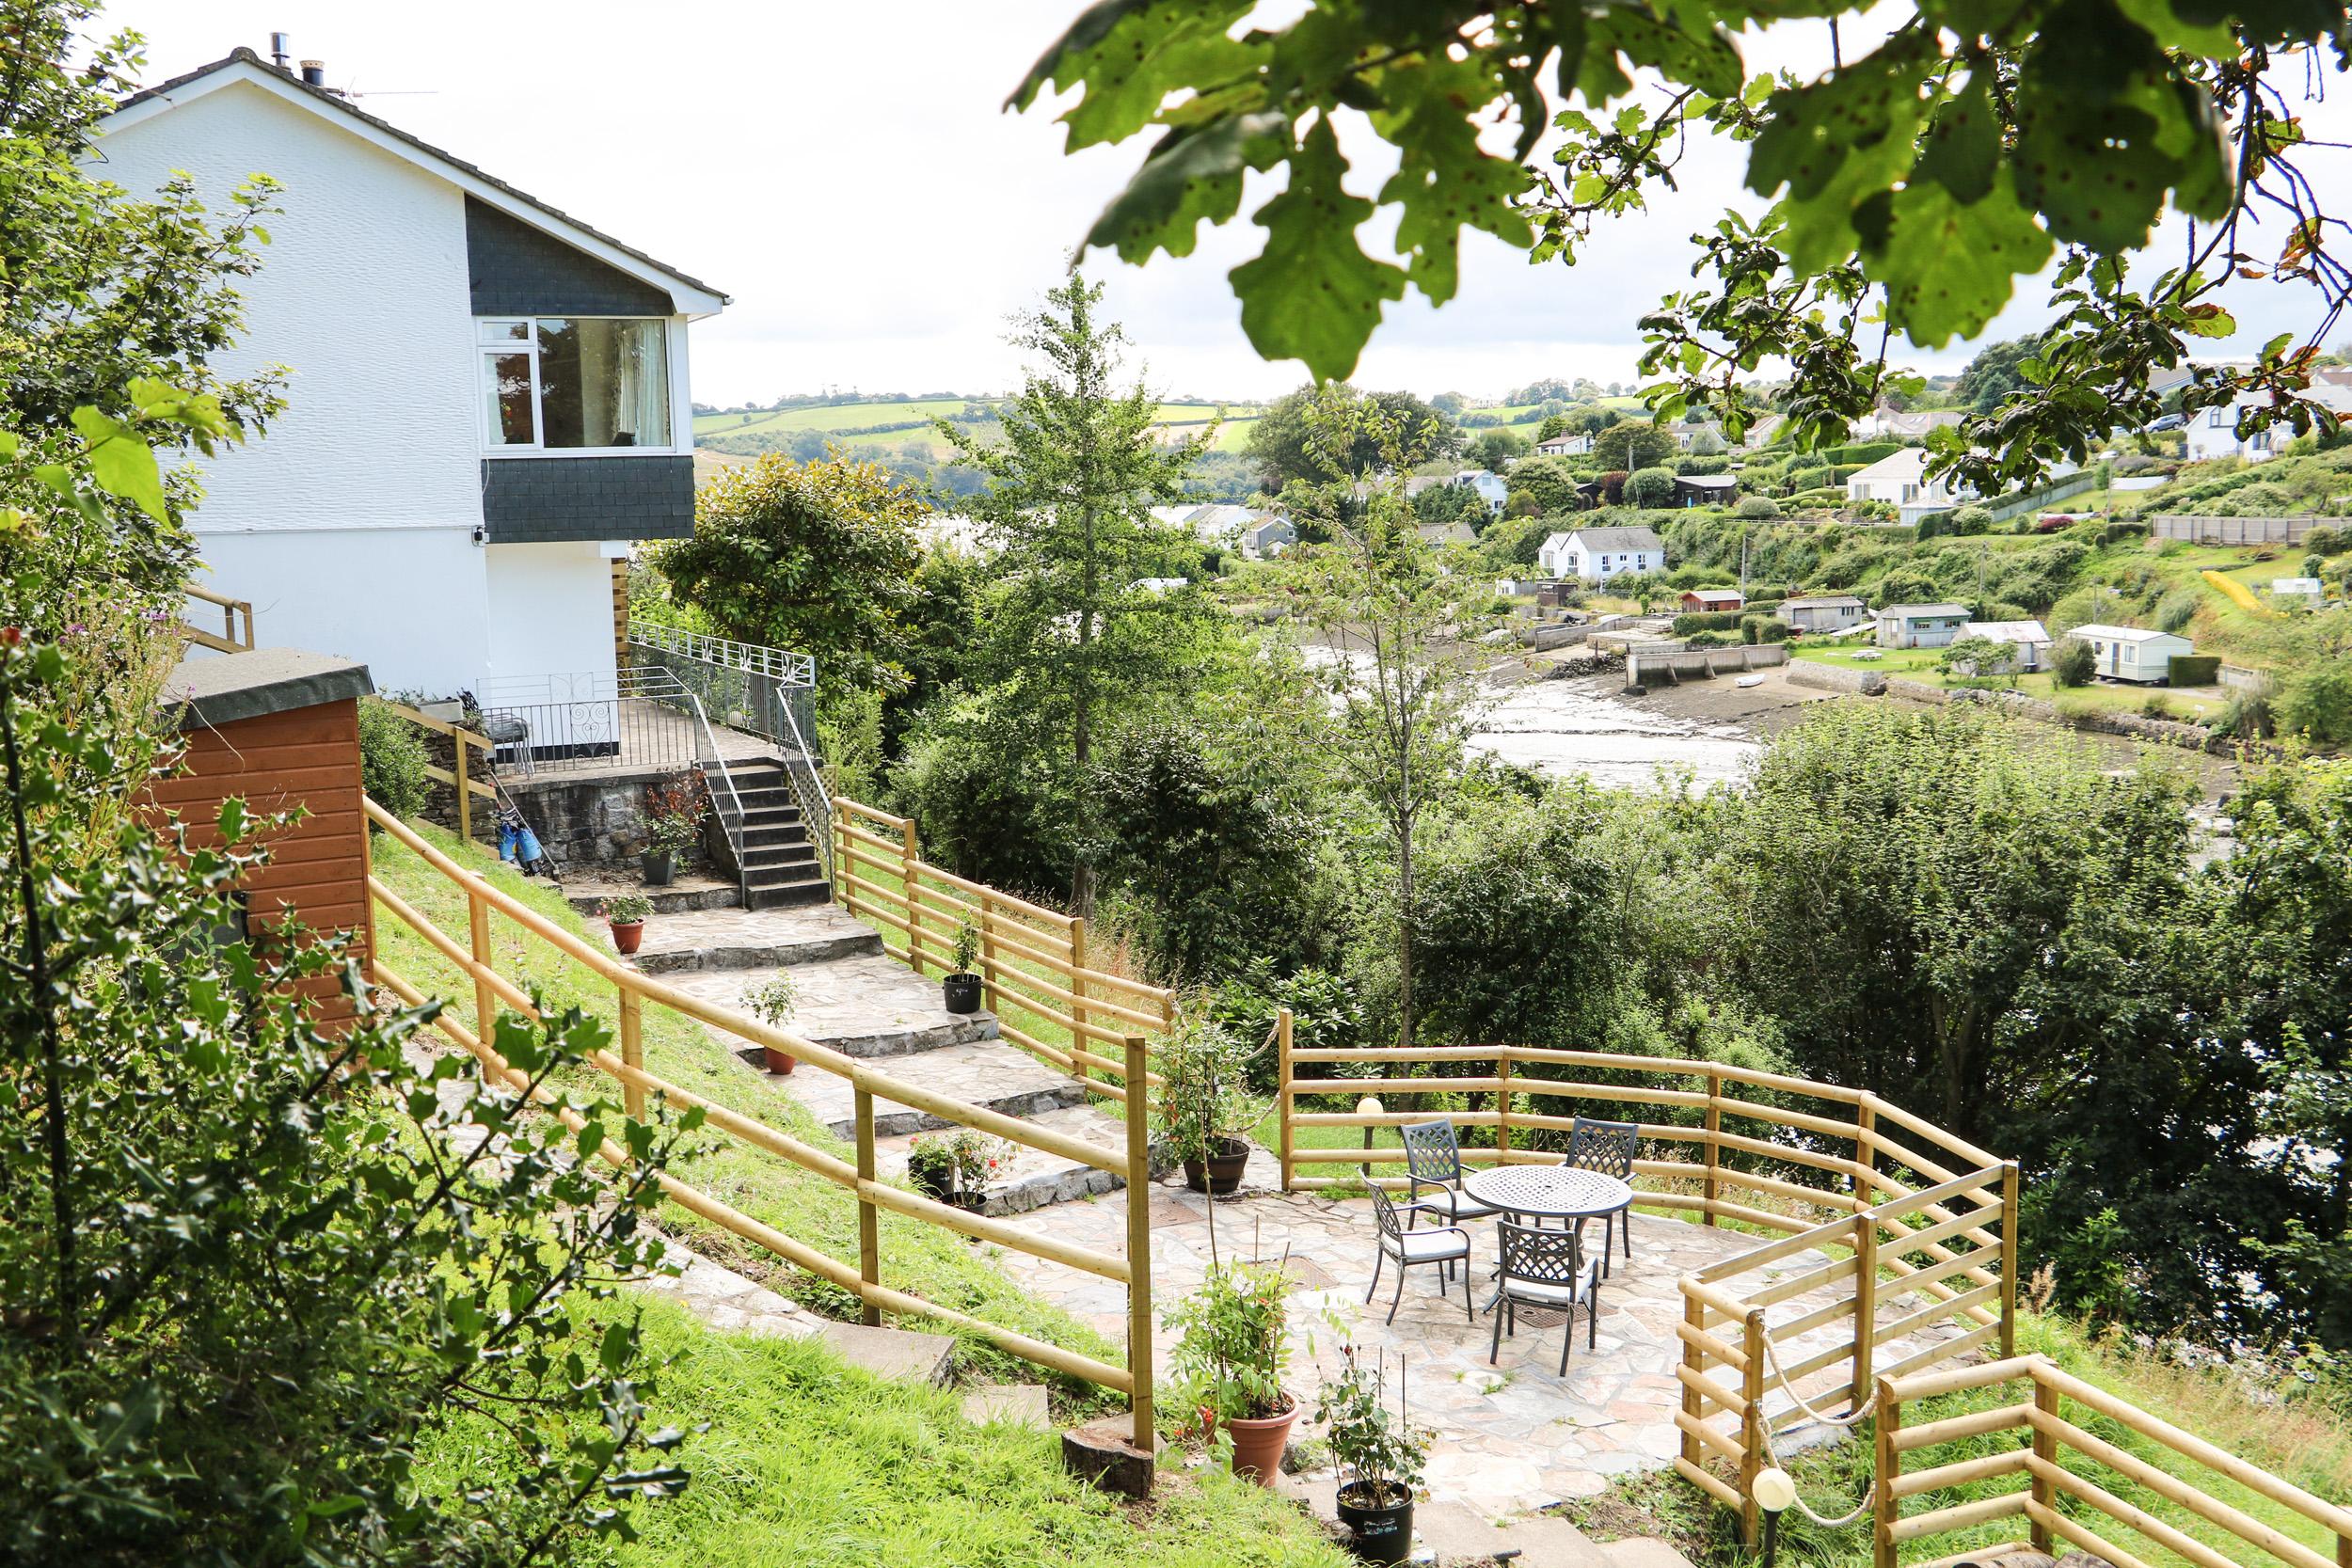 Holiday Cottage Reviews for Rathillet - Self Catering Property in Truro, Cornwall inc Scilly